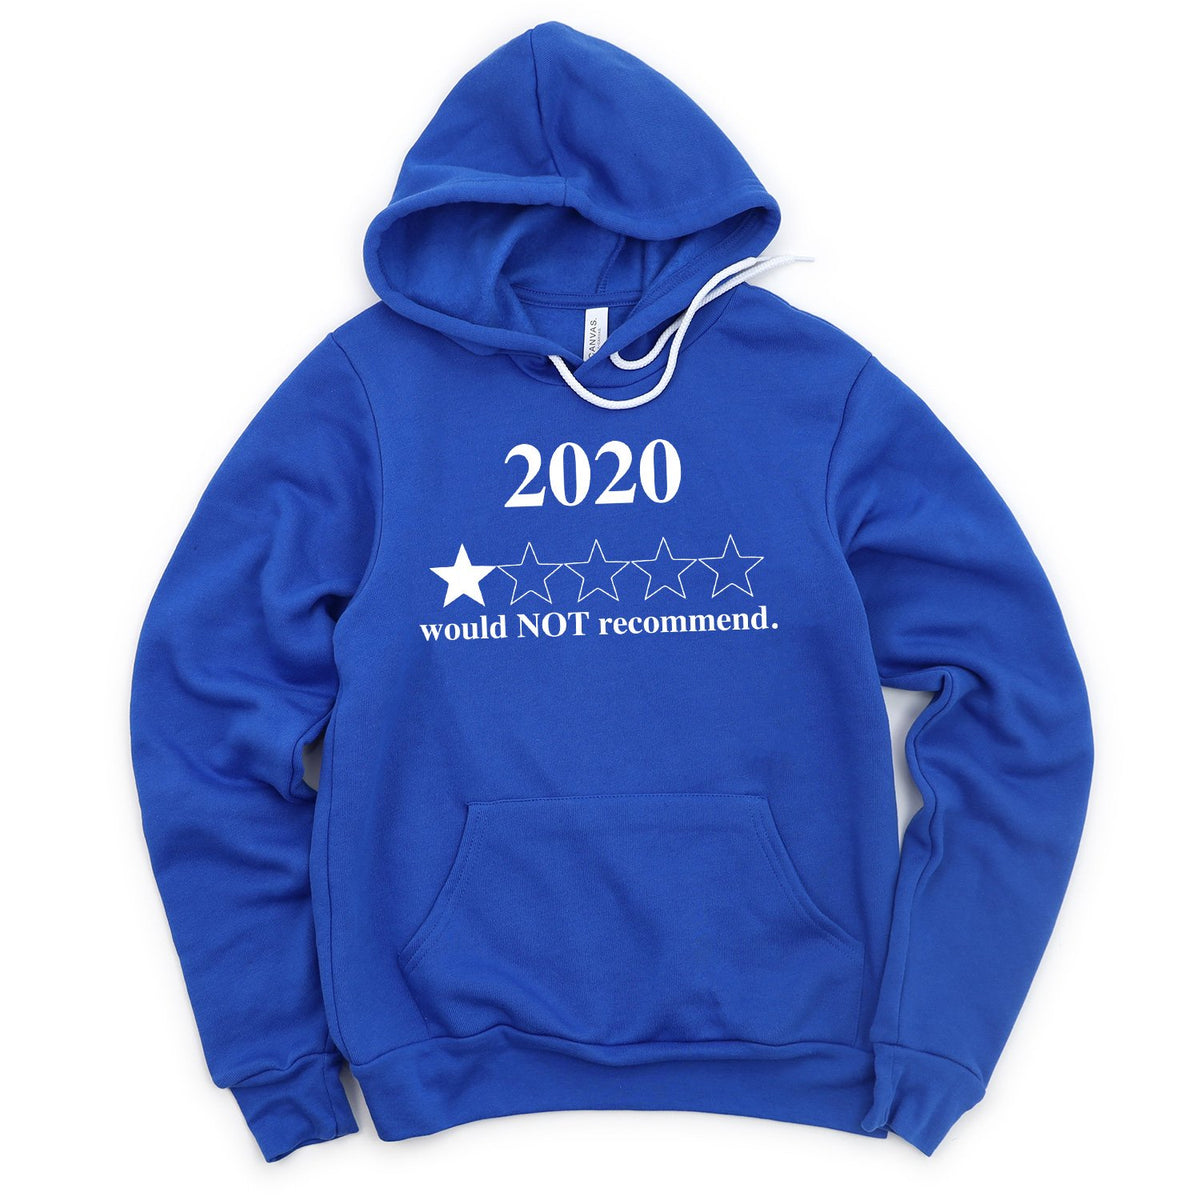 2020 Would Not Recommend - Hoodie Sweatshirt